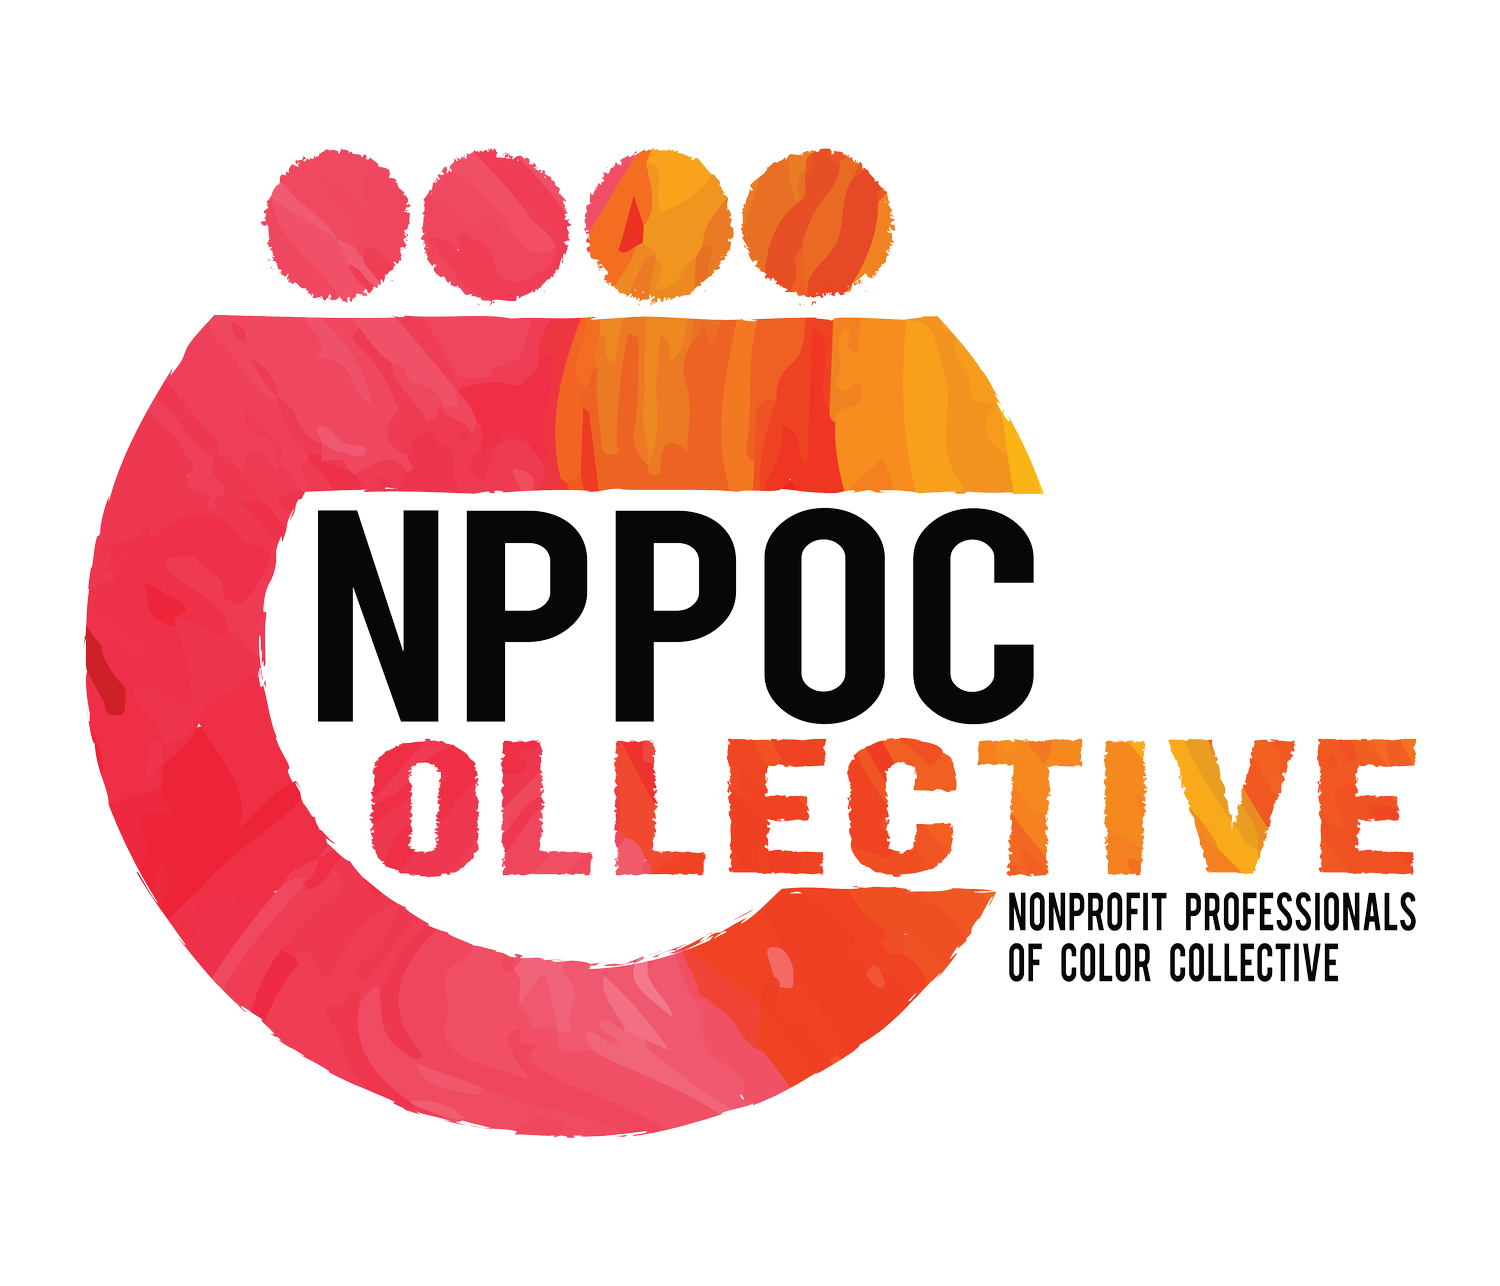 Nonprofit Professionals of Color Collective